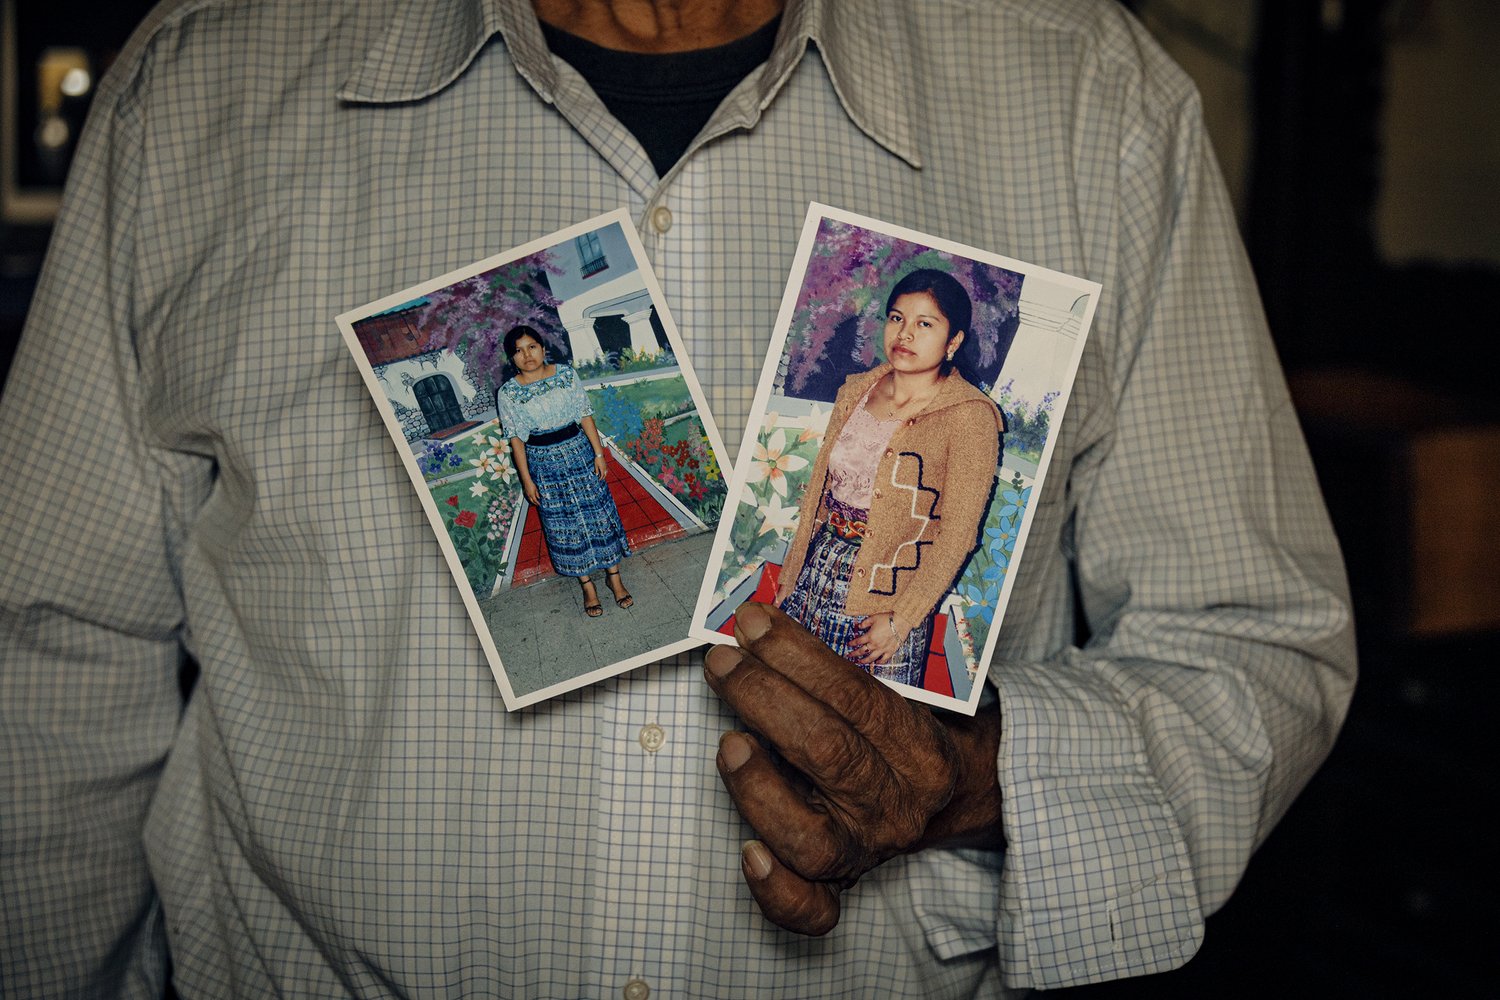 Román Coc holds photos of his daughter Laura, who disappeared in the Arizona desert 13 years ago. © Andrea Godínez